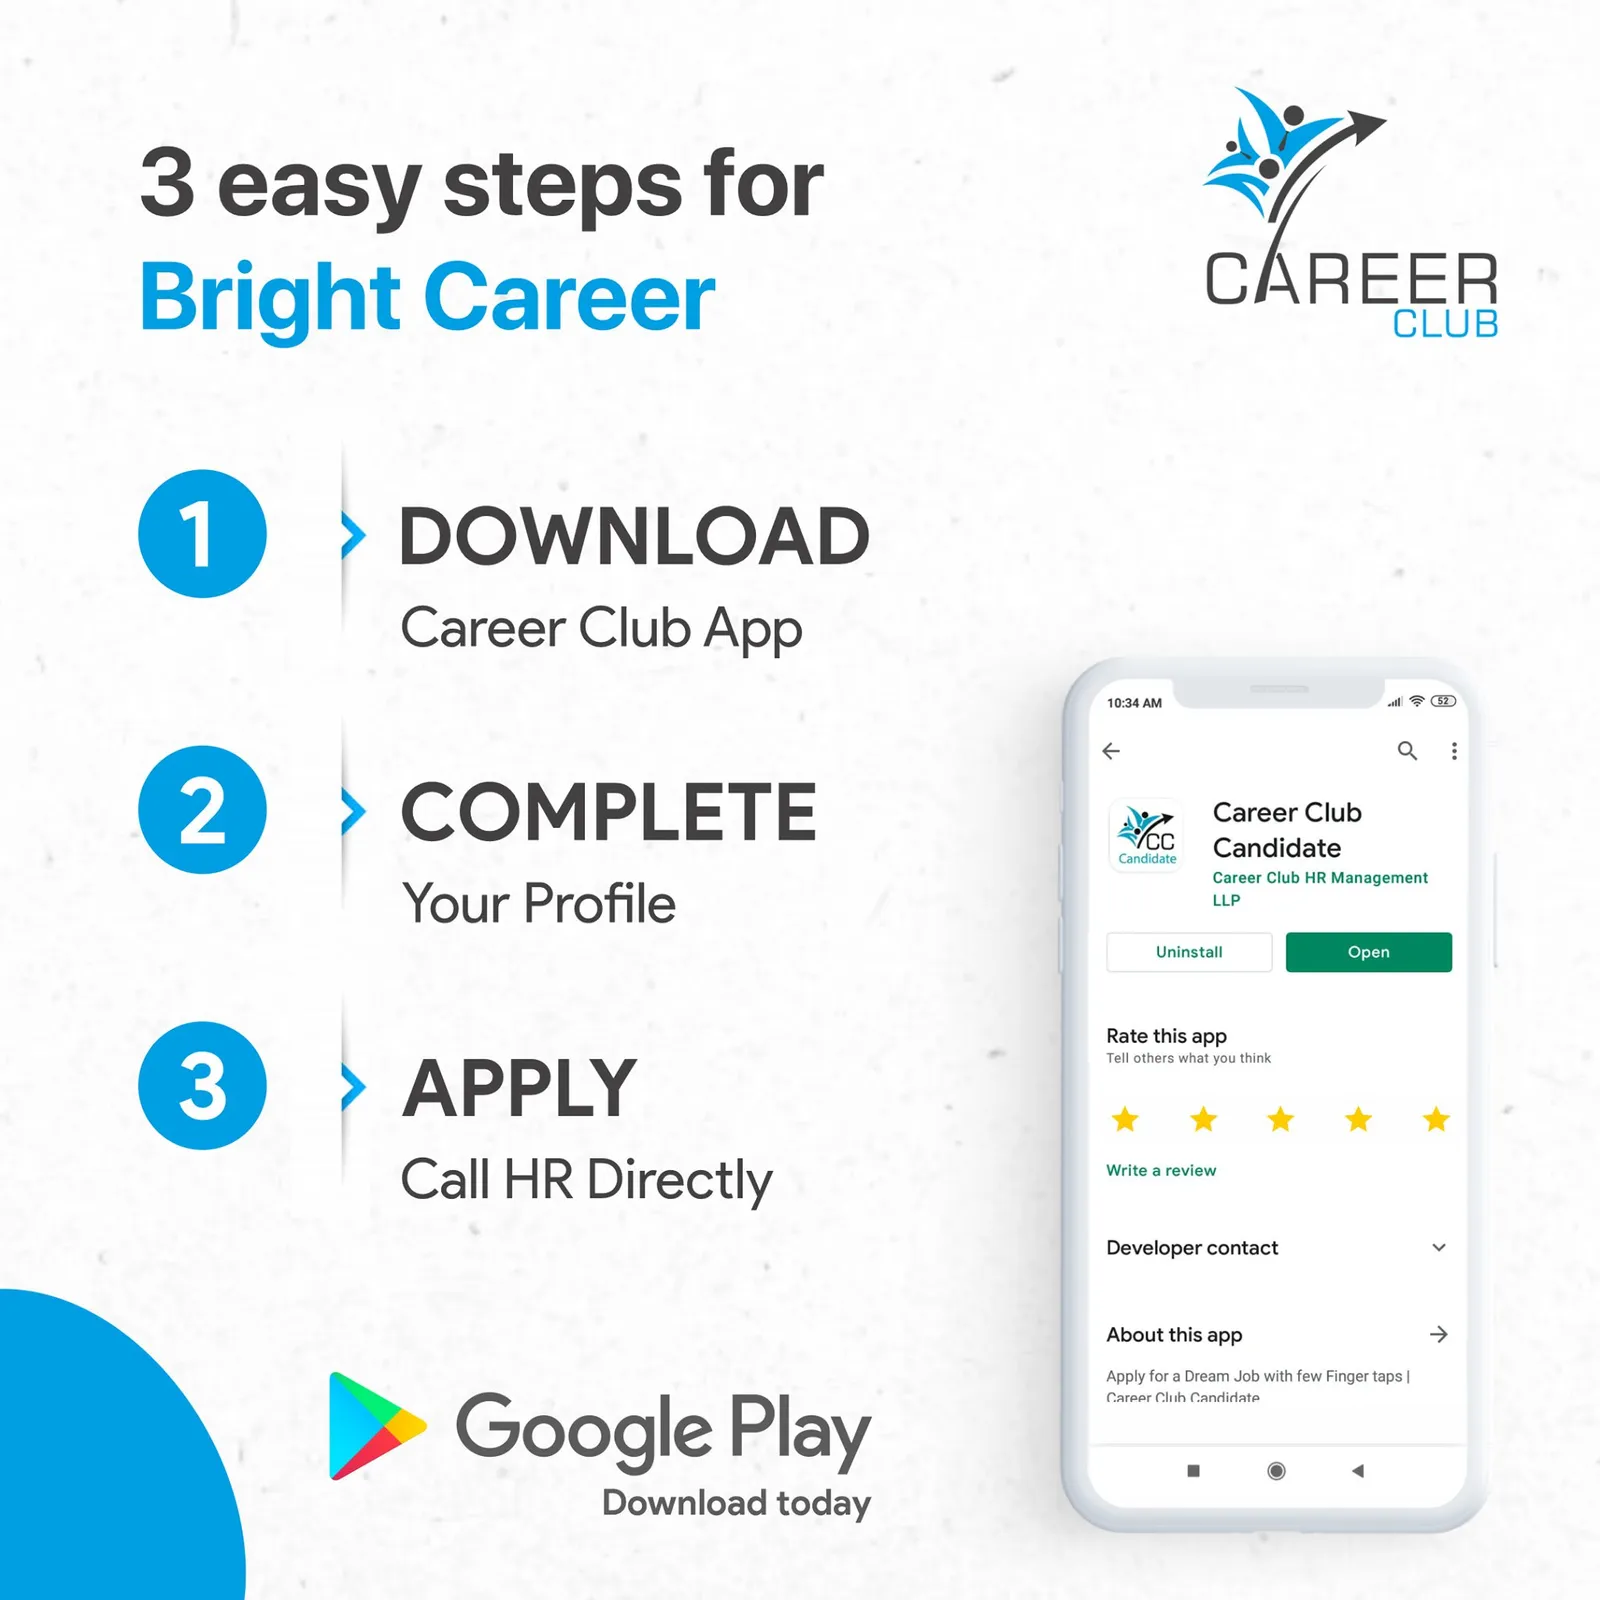 Search Jobs or Hire Employee with Career Club | Post free jobs